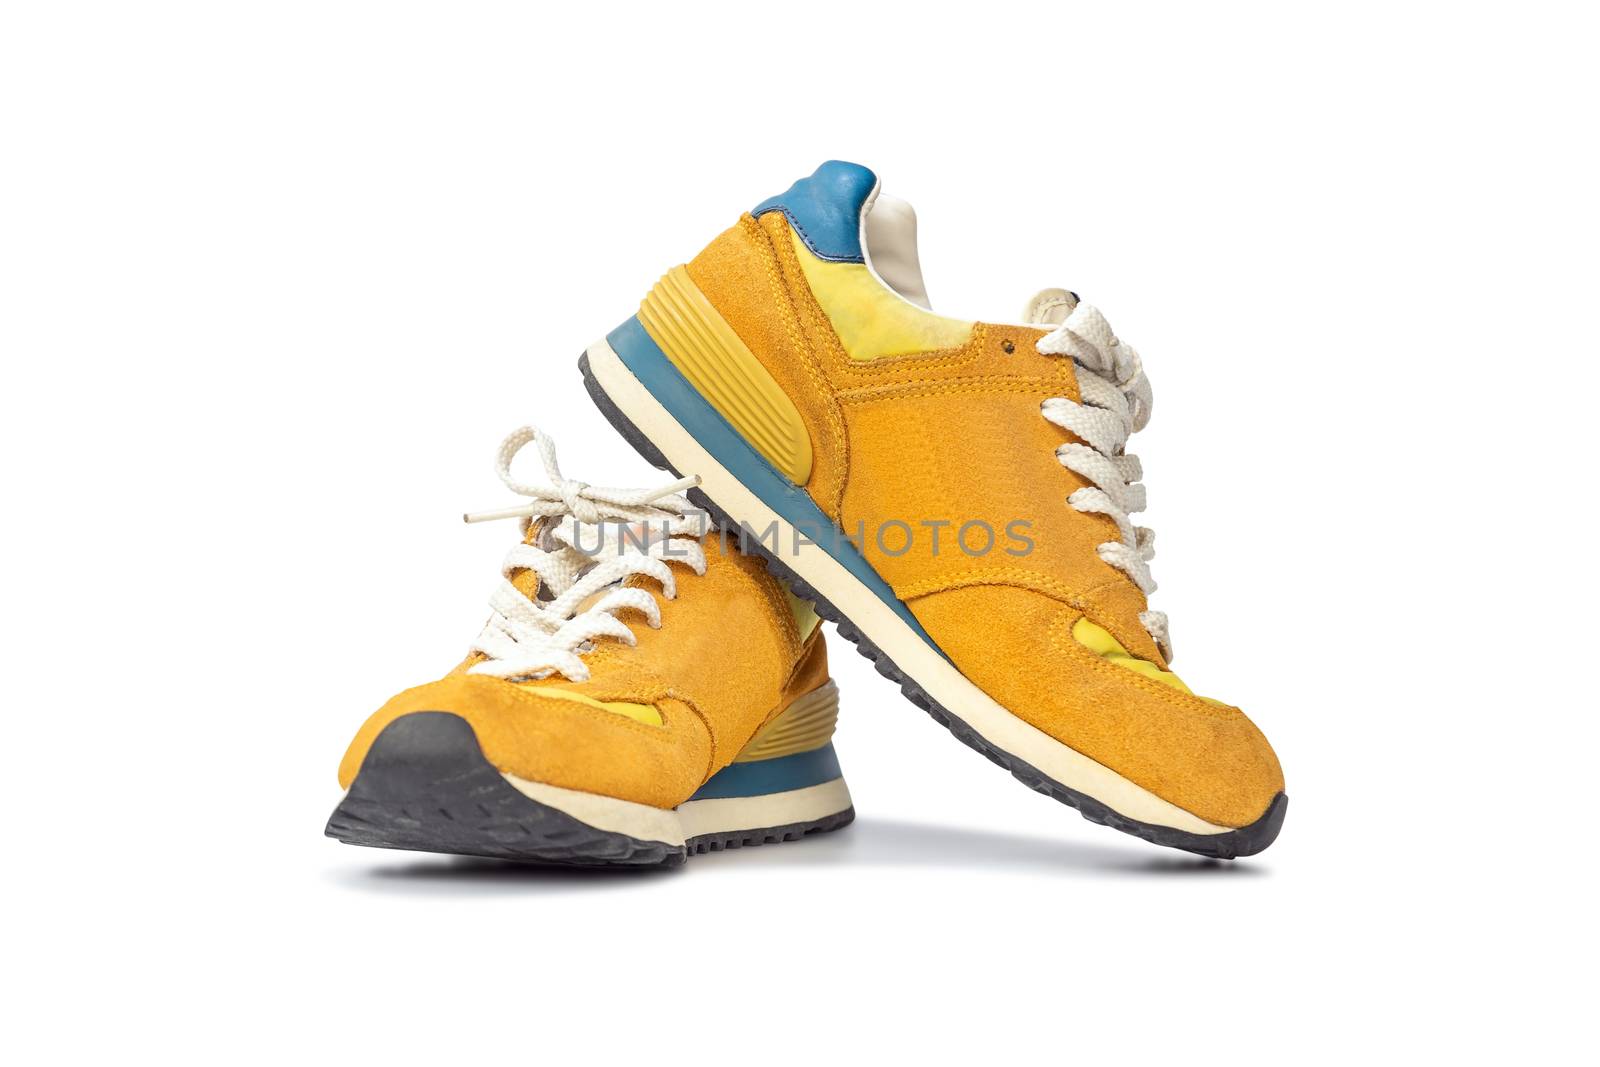 Fashion running sneaker shoes isolated on white background.